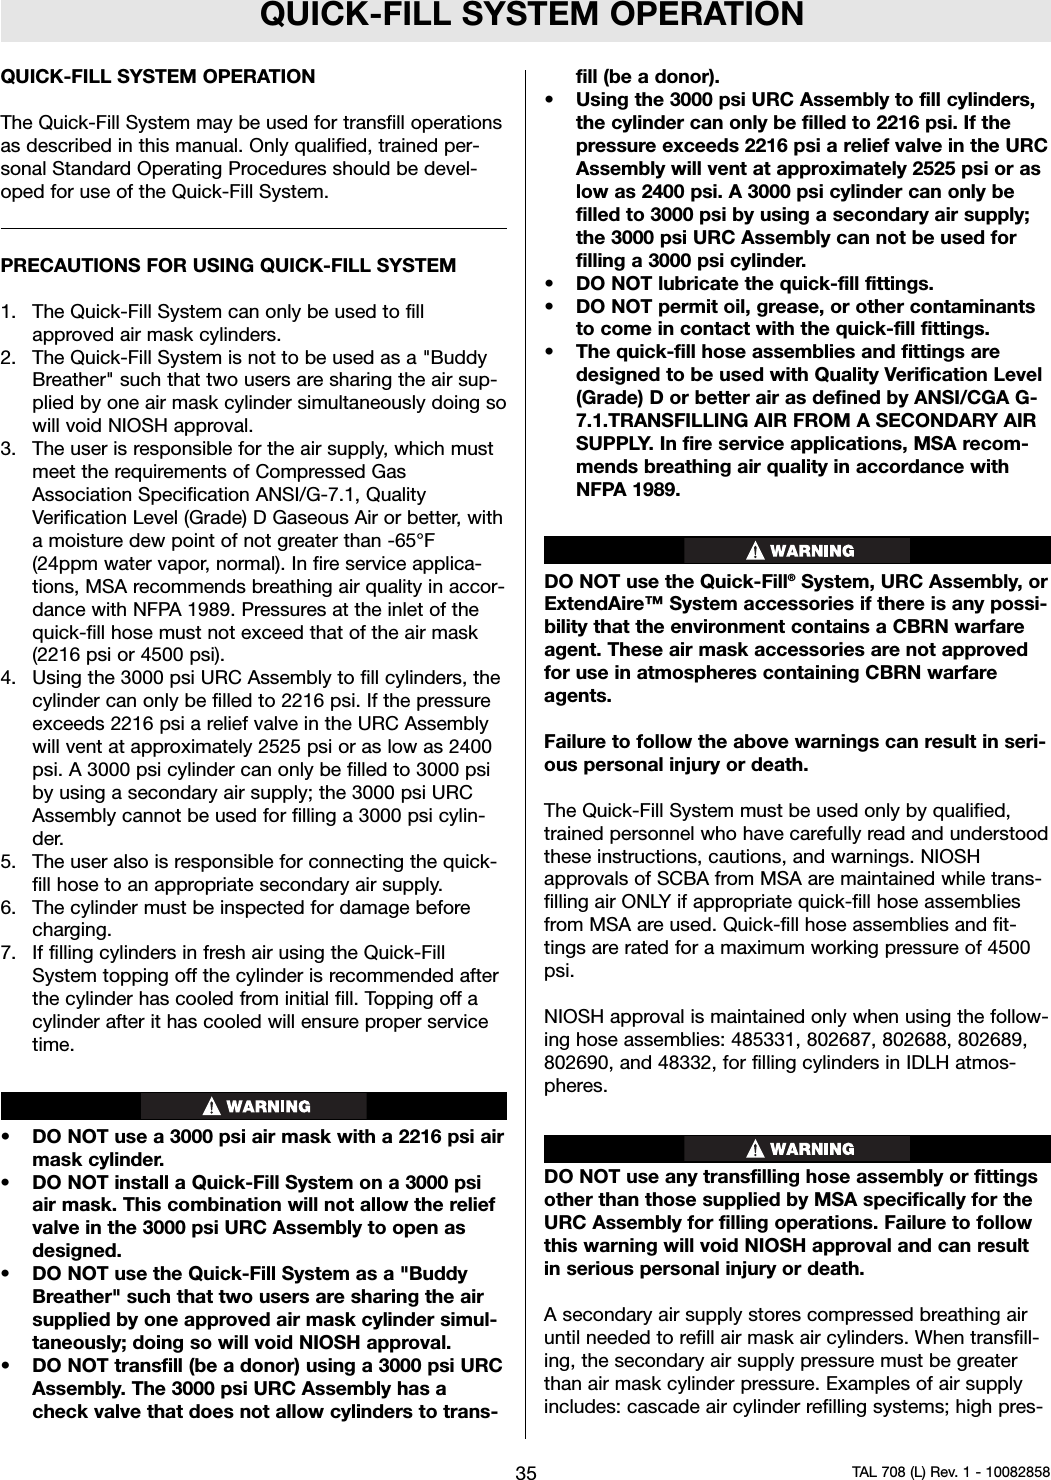 QUICK-FILL SYSTEM OPERATIONQUICK-FILL SYSTEM OPERATIONThe Quick-Fill System may be used for transfill operationsas described in this manual. Only qualified, trained per-sonal Standard Operating Procedures should be devel-oped for use of the Quick-Fill System.PRECAUTIONS FOR USING QUICK-FILL SYSTEM1. The Quick-Fill System can only be used to fillapproved air mask cylinders.2. The Quick-Fill System is not to be used as a &quot;BuddyBreather&quot; such that two users are sharing the air sup-plied by one air mask cylinder simultaneously doing sowill void NIOSH approval.3. The user is responsible for the air supply, which mustmeet the requirements of Compressed GasAssociation Specification ANSI/G-7.1, QualityVerification Level (Grade) D Gaseous Air or better, witha moisture dew point of not greater than -65°F(24ppm water vapor, normal). In fire service applica-tions, MSA recommends breathing air quality in accor-dance with NFPA 1989. Pressures at the inlet of thequick-fill hose must not exceed that of the air mask(2216 psi or 4500 psi).4. Using the 3000 psi URC Assembly to fill cylinders, thecylinder can only be filled to 2216 psi. If the pressureexceeds 2216 psi a relief valve in the URC Assemblywill vent at approximately 2525 psi or as low as 2400psi. A 3000 psi cylinder can only be filled to 3000 psiby using a secondary air supply; the 3000 psi URCAssembly cannot be used for filling a 3000 psi cylin-der.5. The user also is responsible for connecting the quick-fill hose to an appropriate secondary air supply.6. The cylinder must be inspected for damage beforecharging.7. If filling cylinders in fresh air using the Quick-FillSystem topping off the cylinder is recommended afterthe cylinder has cooled from initial fill. Topping off acylinder after it has cooled will ensure proper servicetime.• DO NOT use a 3000 psi air mask with a 2216 psi airmask cylinder.• DO NOT install a Quick-Fill System on a 3000 psiair mask. This combination will not allow the reliefvalve in the 3000 psi URC Assembly to open asdesigned.• DO NOT use the Quick-Fill System as a &quot;BuddyBreather&quot; such that two users are sharing the airsupplied by one approved air mask cylinder simul-taneously; doing so will void NIOSH approval.• DO NOT transfill (be a donor) using a 3000 psi URCAssembly. The 3000 psi URC Assembly has acheck valve that does not allow cylinders to trans-fill (be a donor).•Using the 3000 psi URC Assembly to fill cylinders,the cylinder can only be filled to 2216 psi. If thepressure exceeds 2216 psi a relief valve in the URCAssembly will vent at approximately 2525 psi or aslow as 2400 psi. A 3000 psi cylinder can only befilled to 3000 psi by using a secondary air supply;the 3000 psi URC Assembly can not be used forfilling a 3000 psi cylinder.• DO NOT lubricate the quick-fill fittings.• DO NOT permit oil, grease, or other contaminantsto come in contact with the quick-fill fittings.• The quick-fill hose assemblies and fittings aredesigned to be used with Quality Verification Level(Grade) D or better air as defined by ANSI/CGA G-7.1.TRANSFILLING AIR FROM A SECONDARY AIRSUPPLY. In fire service applications, MSA recom-mends breathing air quality in accordance withNFPA 1989.DO NOT use the Quick-Fill®System, URC Assembly, orExtendAire™ System accessories if there is any possi-bility that the environment contains a CBRN warfareagent. These air mask accessories are not approvedfor use in atmospheres containing CBRN warfareagents.Failure to follow the above warnings can result in seri-ous personal injury or death.The Quick-Fill System must be used only by qualified,trained personnel who have carefully read and understoodthese instructions, cautions, and warnings. NIOSHapprovals of SCBA from MSA are maintained while trans-filling air ONLY if appropriate quick-fill hose assembliesfrom MSA are used. Quick-fill hose assemblies and fit-tings are rated for a maximum working pressure of 4500psi.NIOSH approval is maintained only when using the follow-ing hose assemblies: 485331, 802687, 802688, 802689,802690, and 48332, for filling cylinders in IDLH atmos-pheres.DO NOT use any transfilling hose assembly or fittingsother than those supplied by MSA specifically for theURC Assembly for filling operations. Failure to followthis warning will void NIOSH approval and can resultin serious personal injury or death.A secondary air supply stores compressed breathing airuntil needed to refill air mask air cylinders. When transfill-ing, the secondary air supply pressure must be greaterthan air mask cylinder pressure. Examples of air supplyincludes: cascade air cylinder refilling systems; high pres-35 TAL 708 (L) Rev. 1 - 10082858